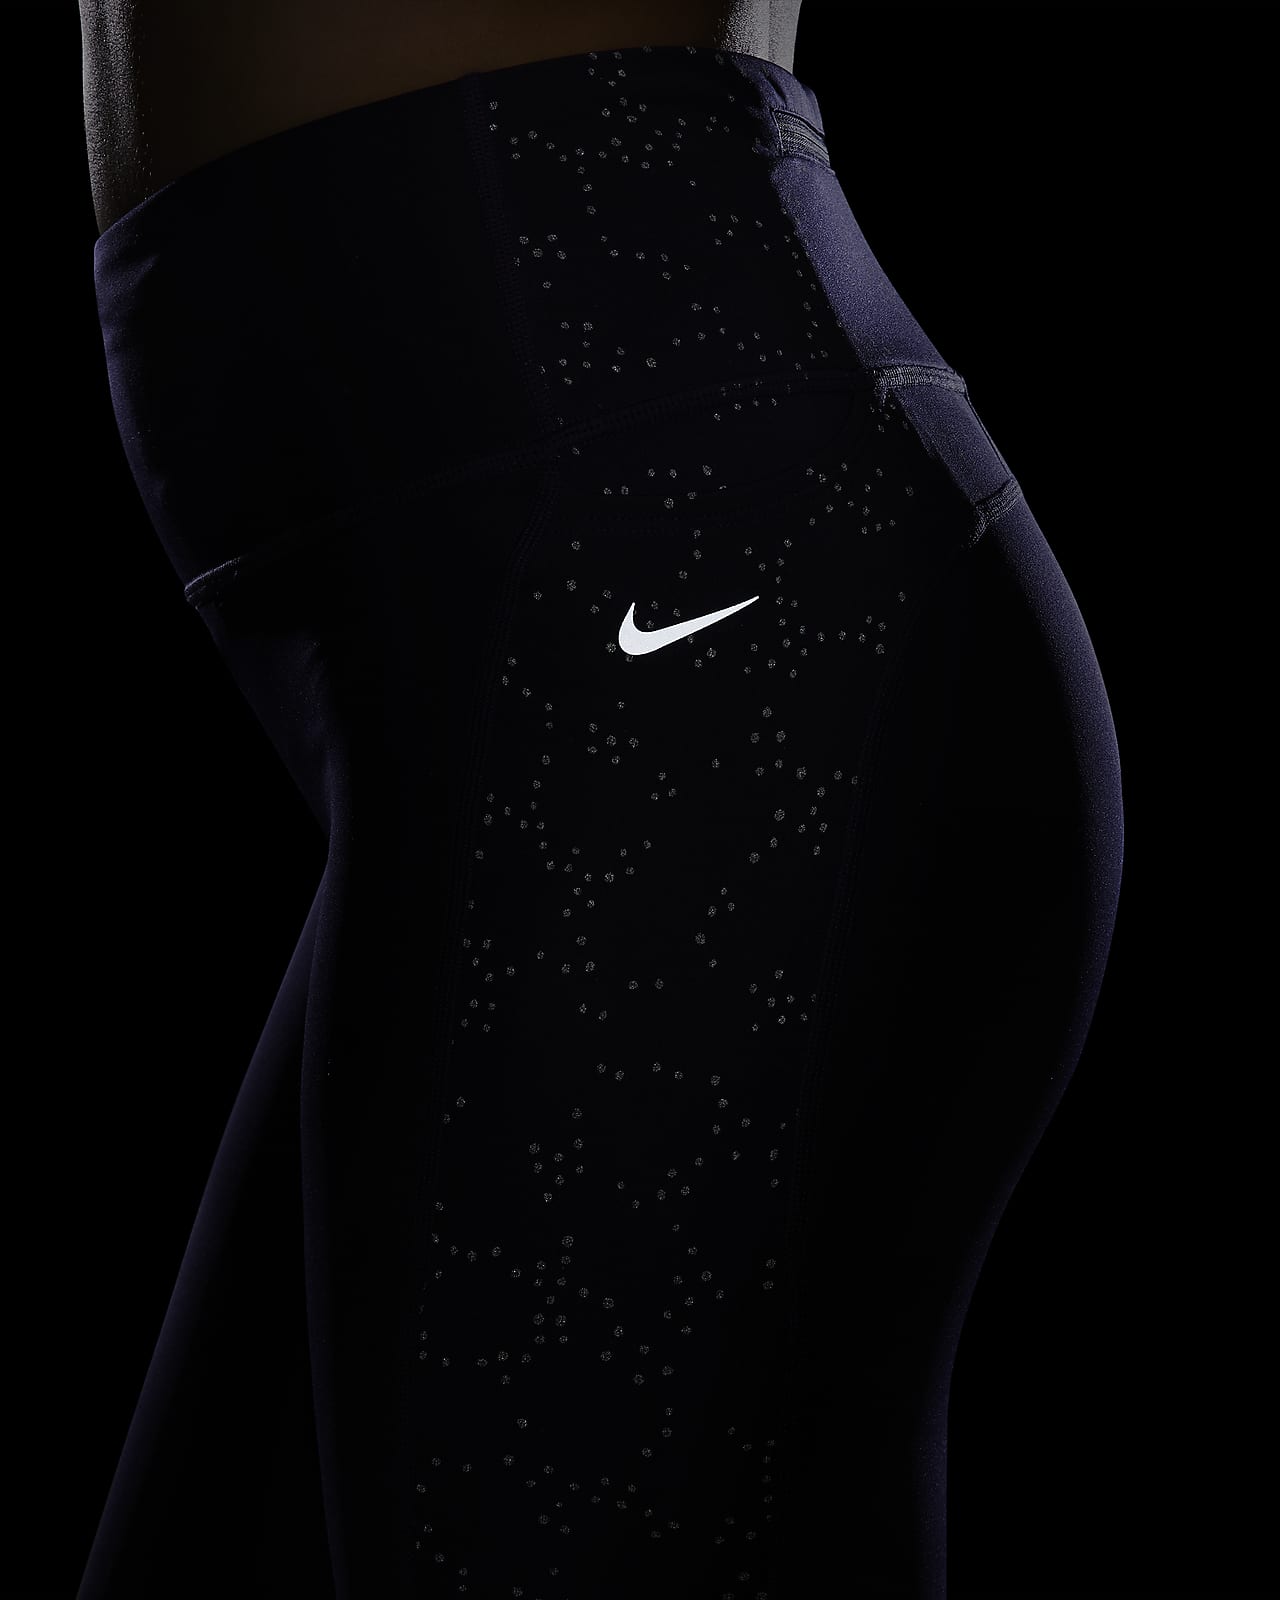 Nike TIGHTS WOMEN'S SMALL Fast 7/8 Printed Running Black/white